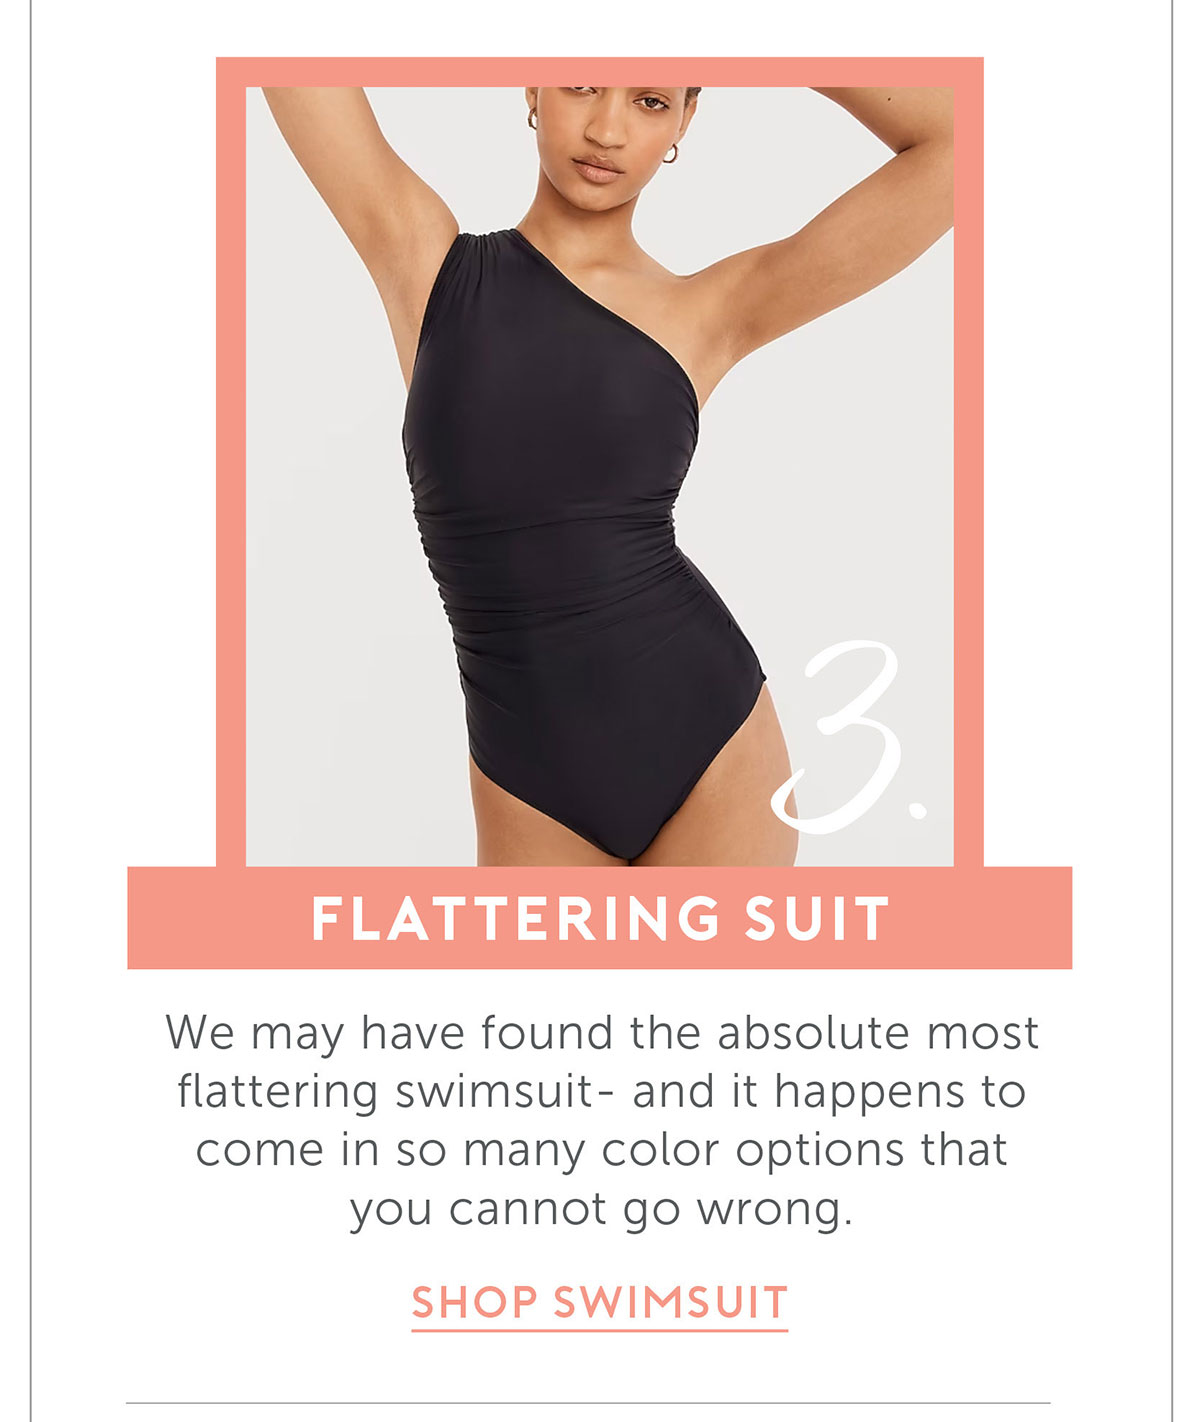 Flattering Suit We may have found the absolute most flattering swimsuit- and it happens to come in so many color options that you cannot go wrong.